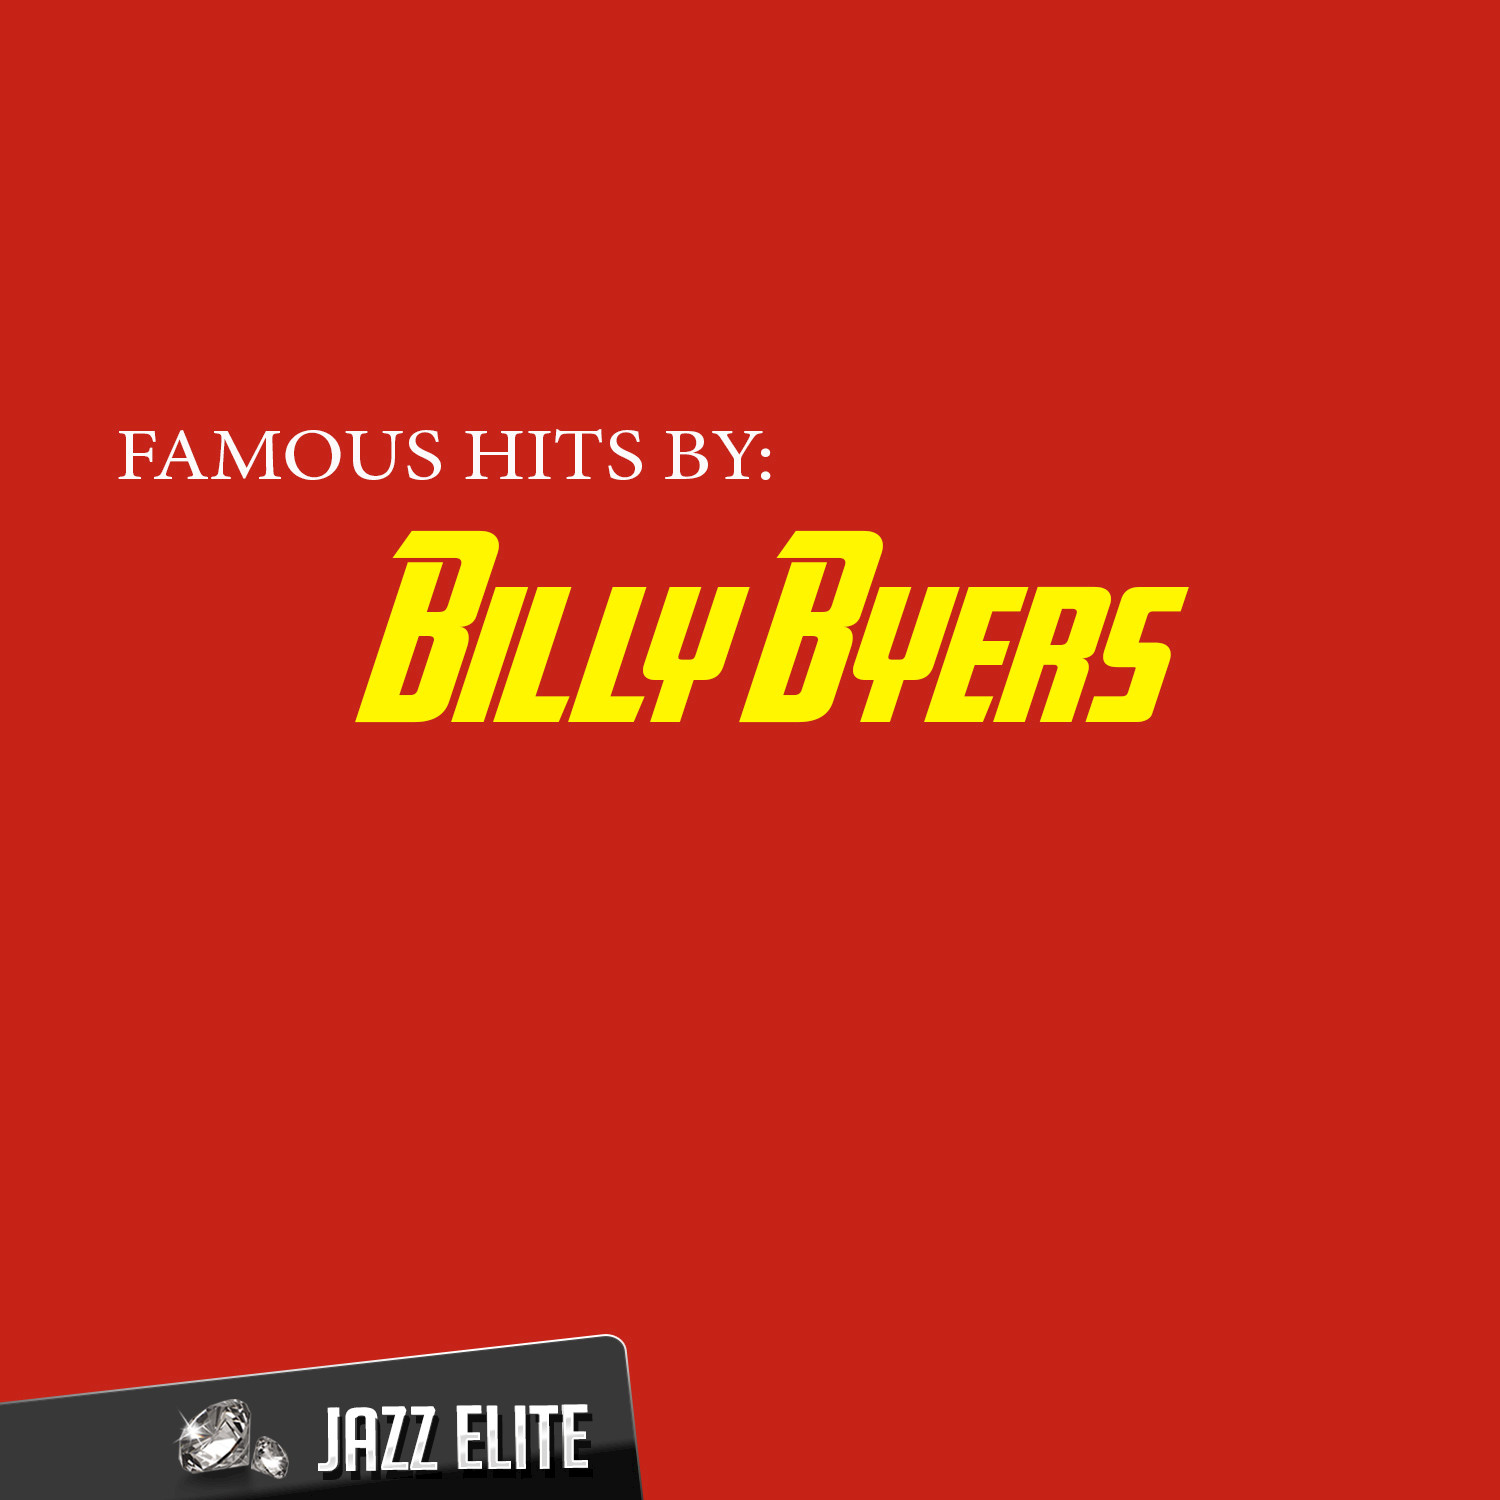 Famous Hits by Billy byers